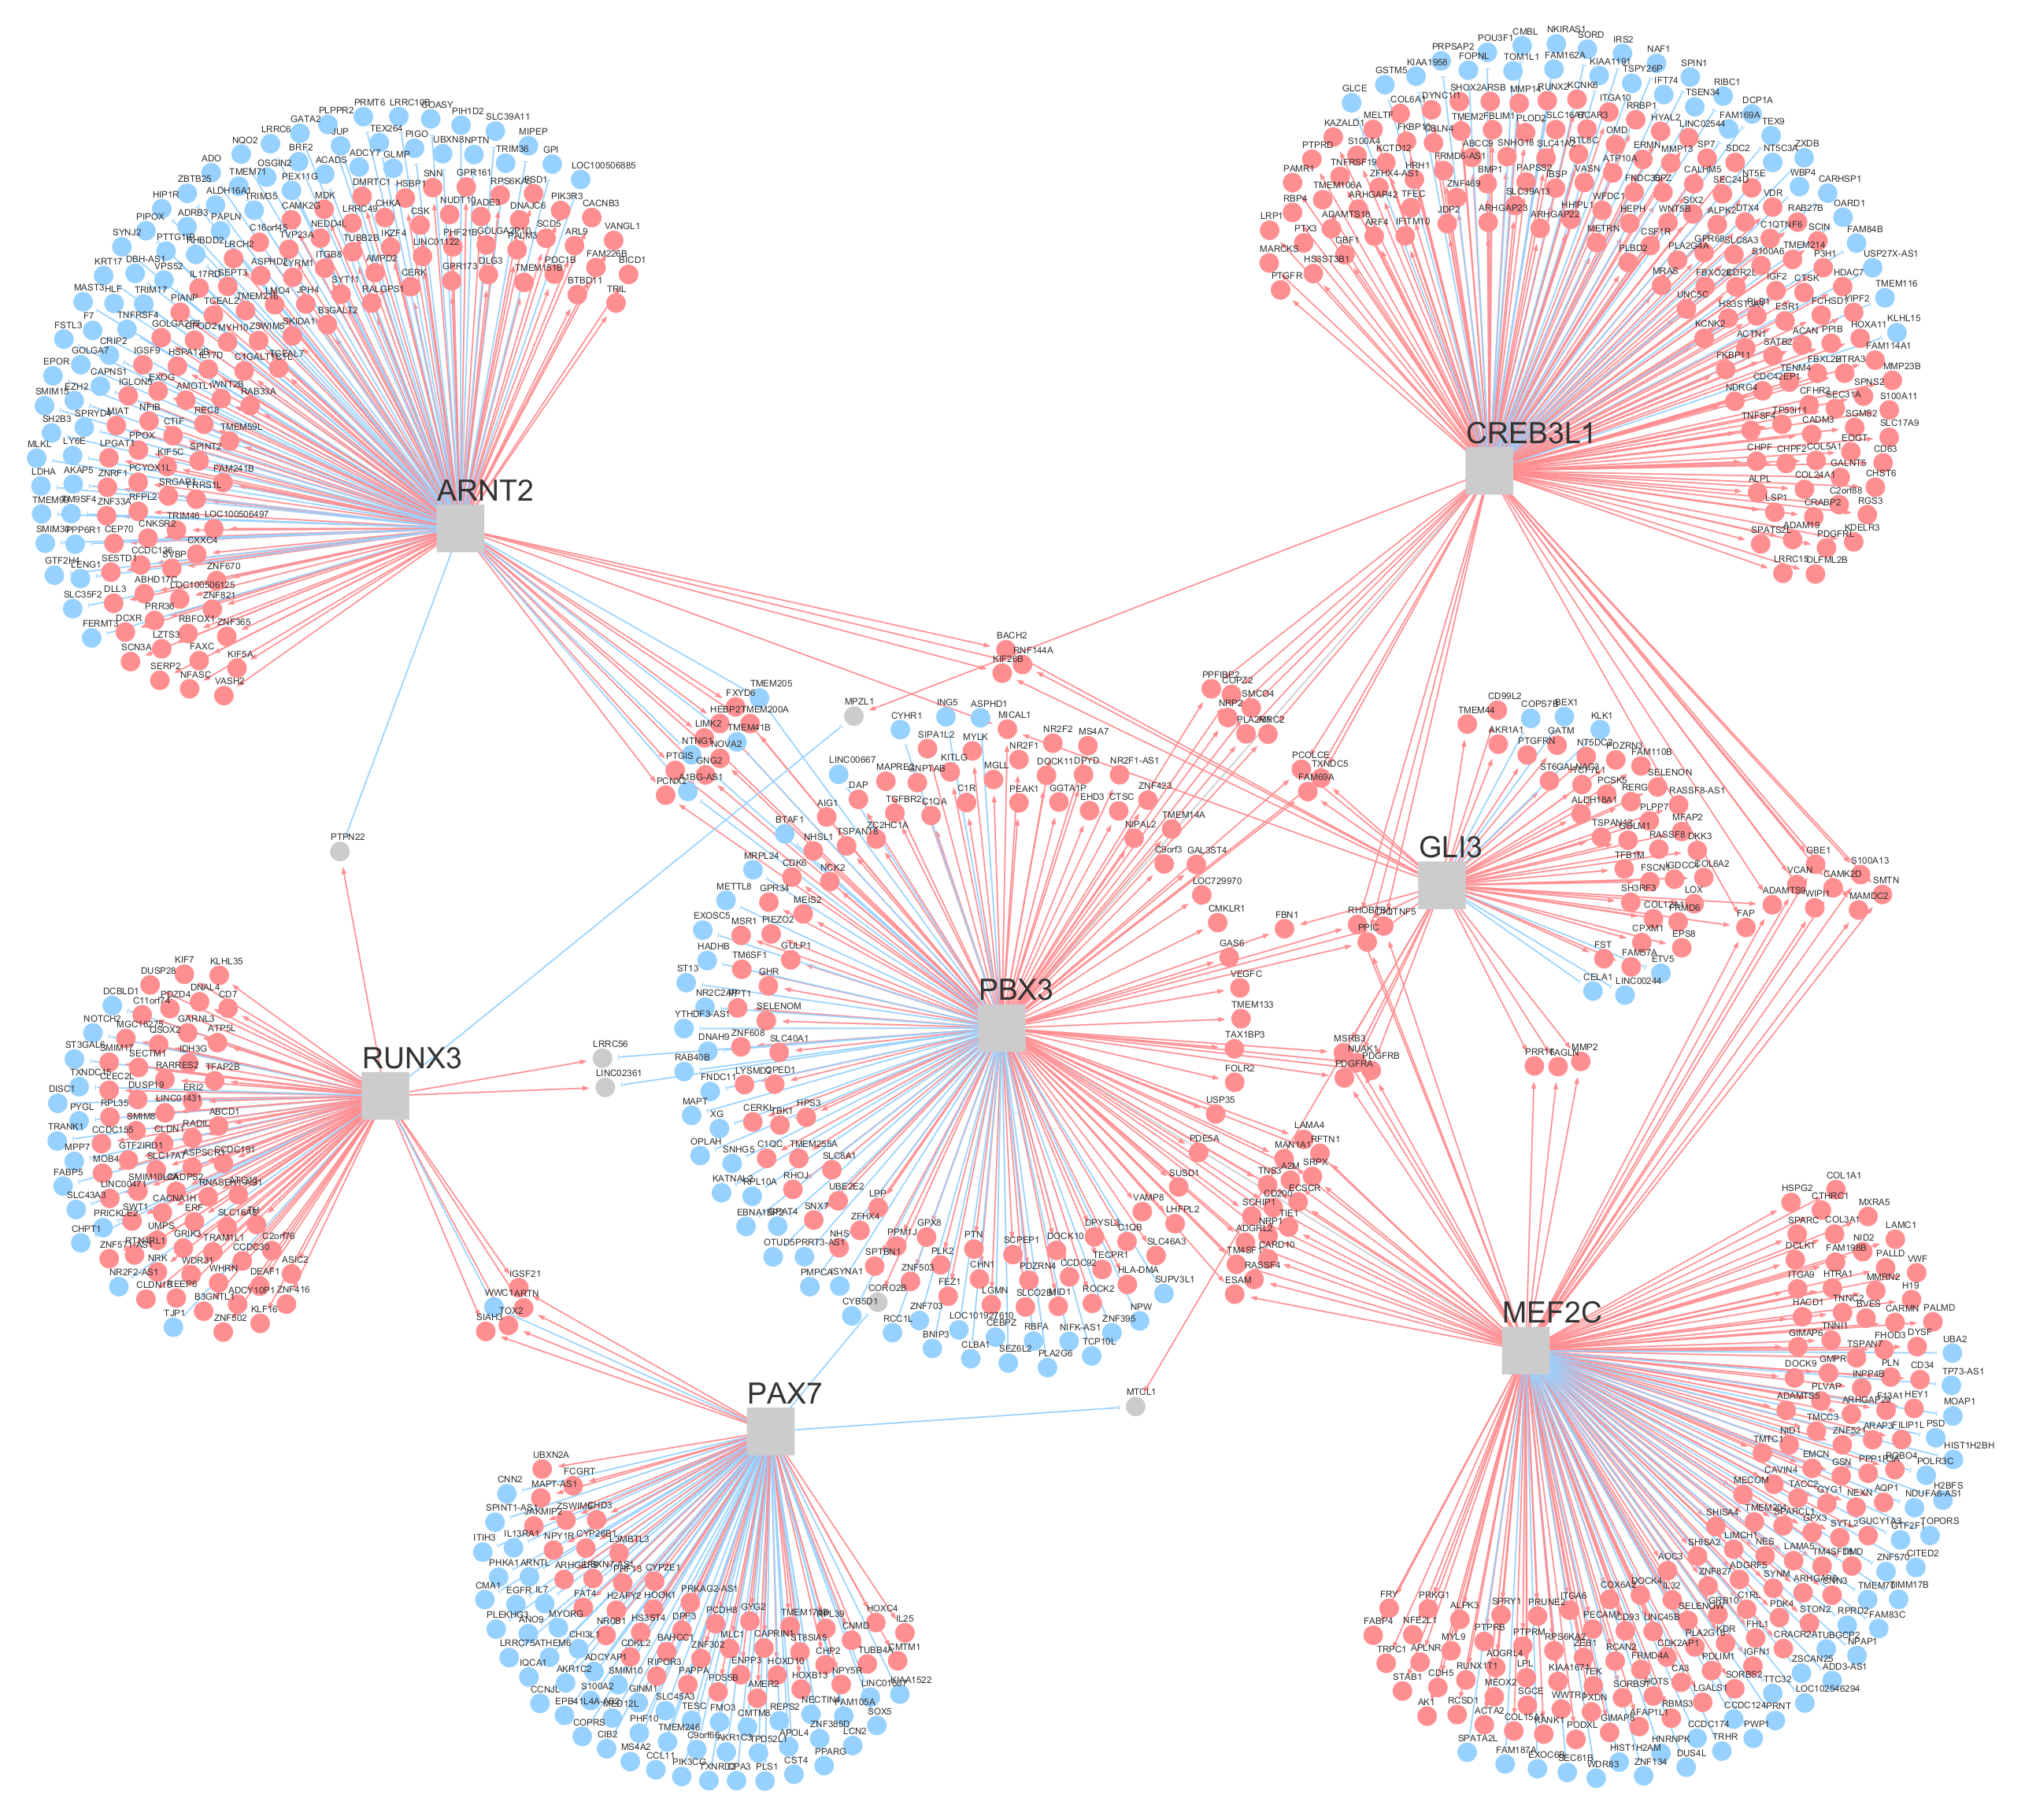 Analysis of biological networks